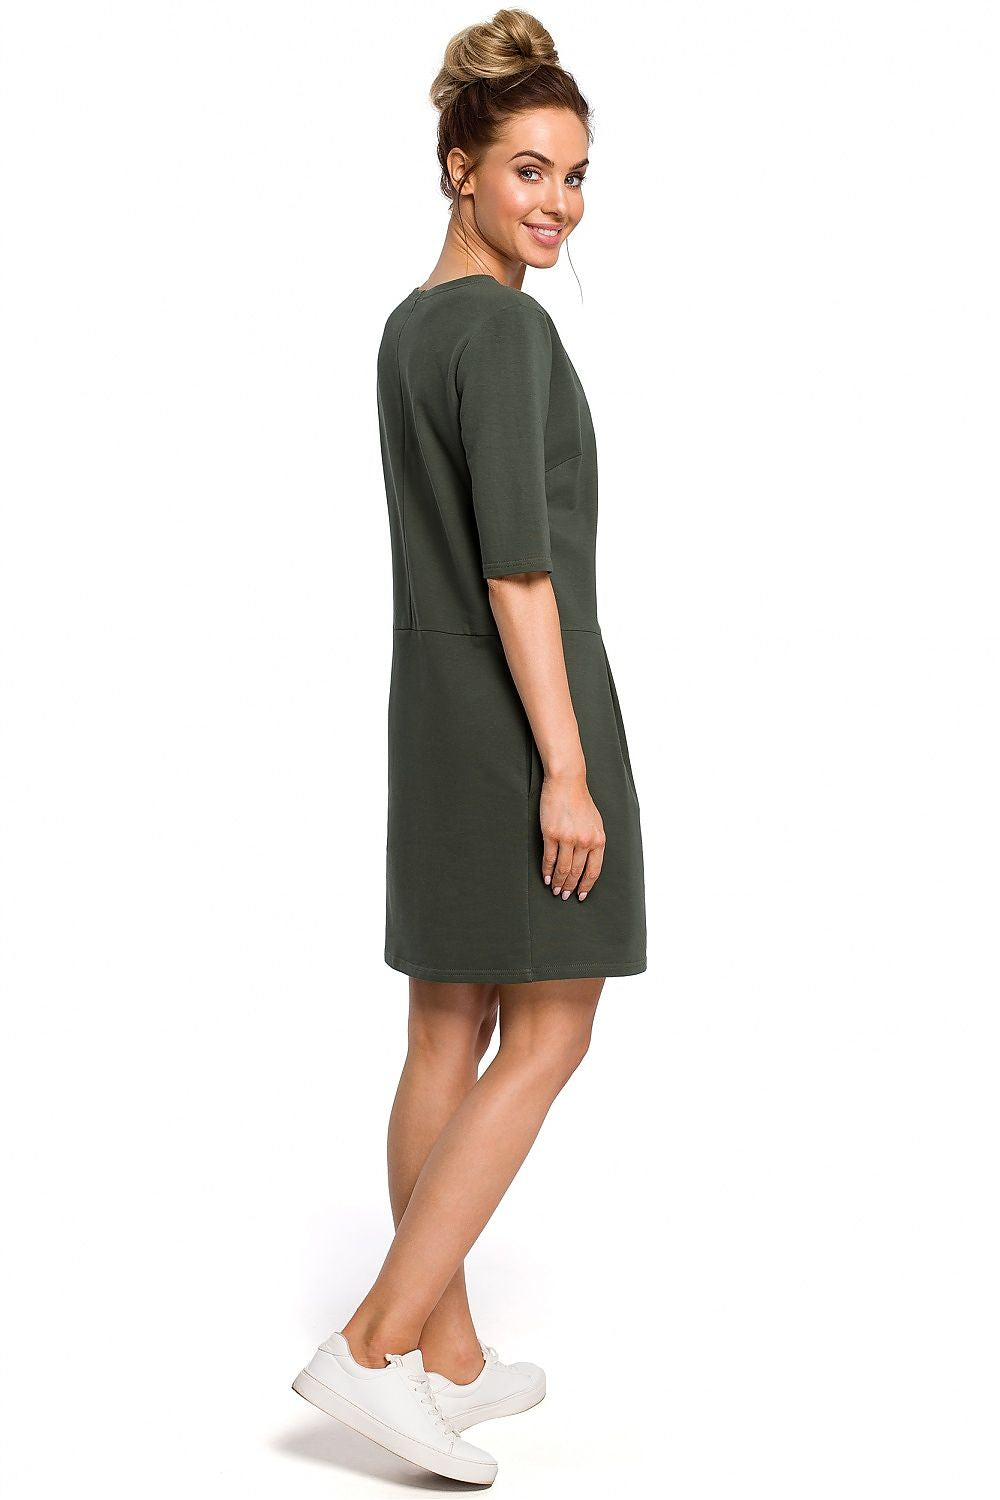 Minimalism Dropped Waist Dress with A Cute Bow on Shoulder